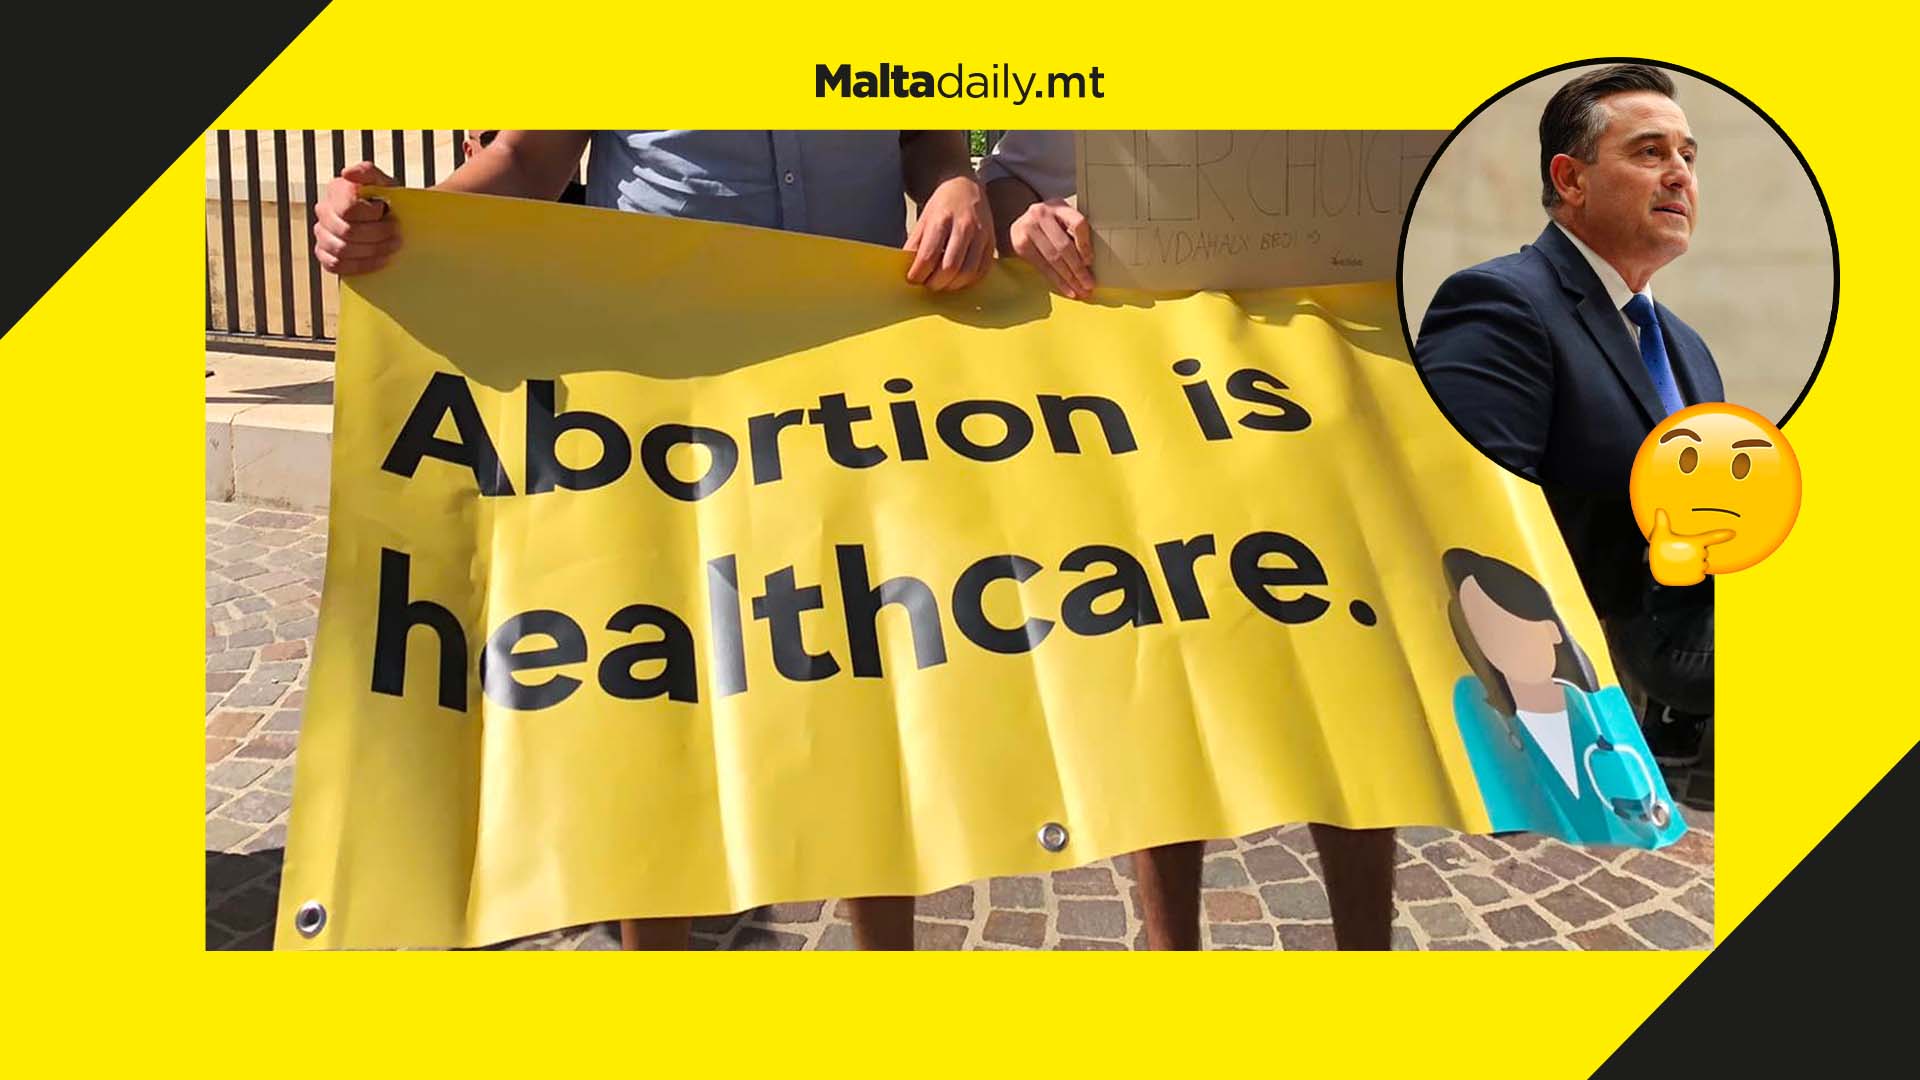 Pro-choice activists call out PN leader’s position as opposite of pro-life